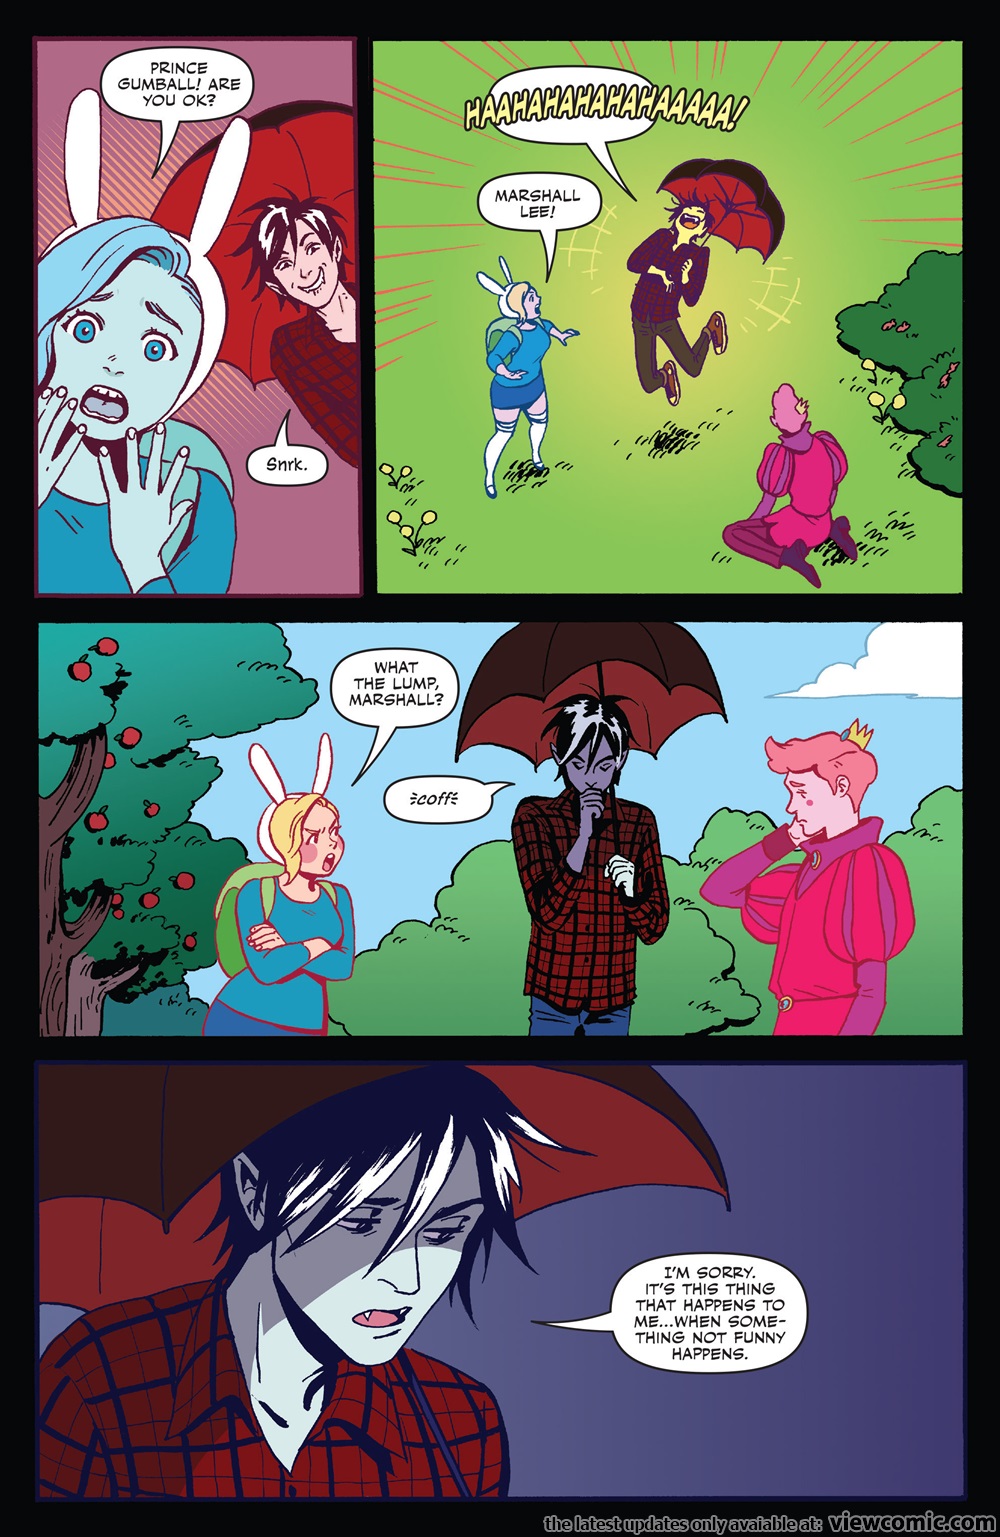 Prince Gumball Gay Porn - Adventure Time Marshall Lee Spectacular 001 2017 | Read Adventure Time  Marshall Lee Spectacular 001 2017 comic online in high quality. Read Full  Comic online for free - Read comics online in high quality .